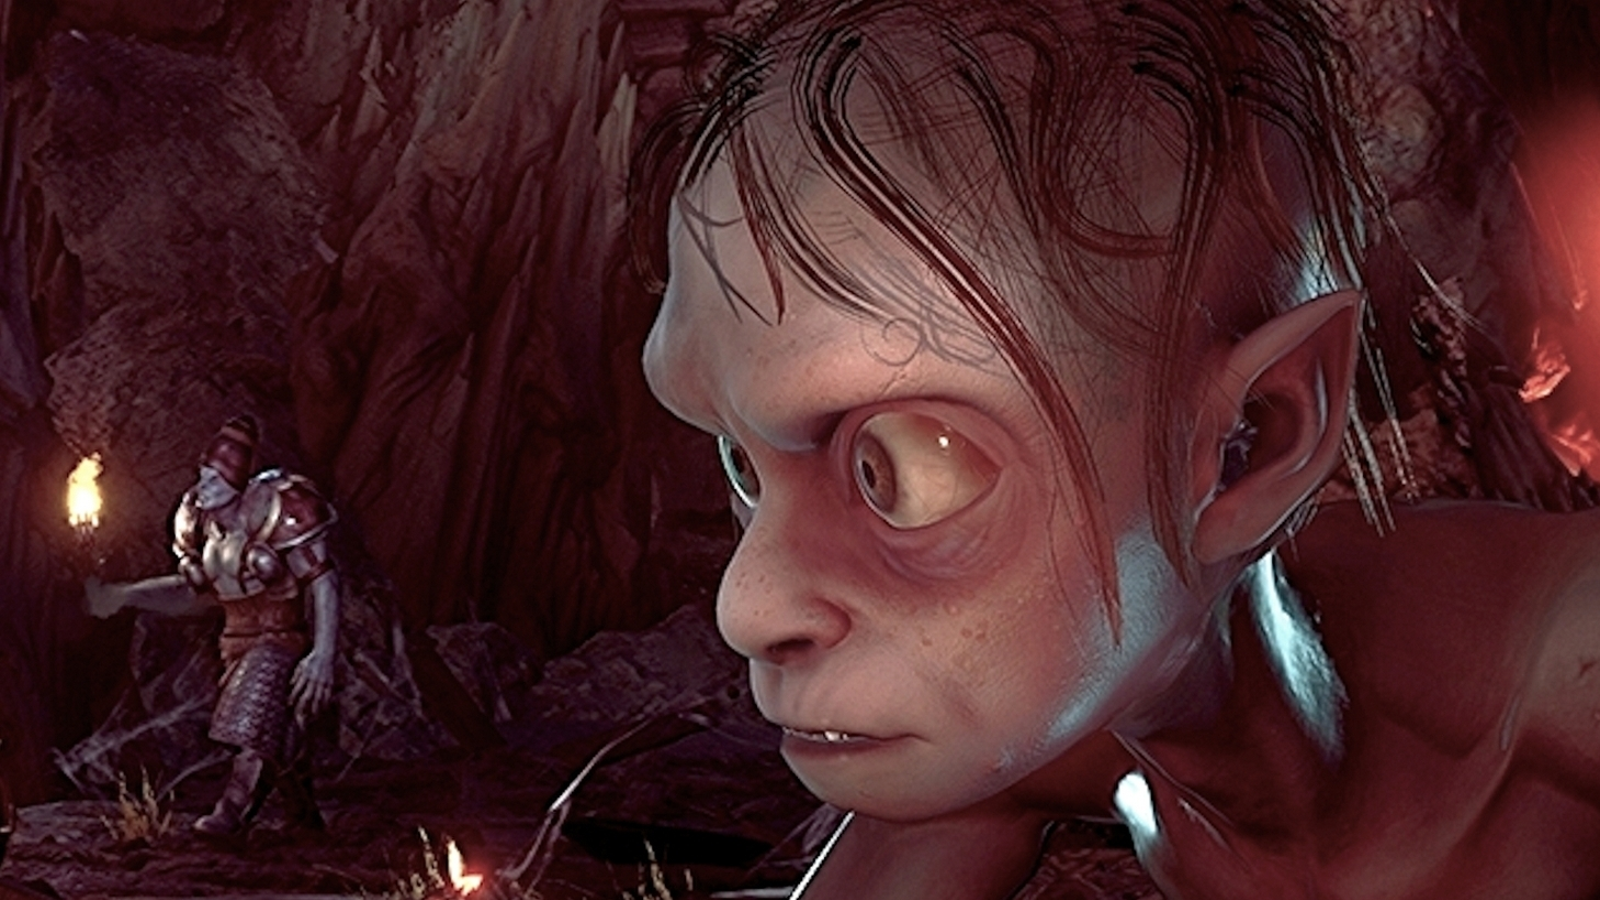 Lord of the Rings: Gollum Confirmed for PS5, Xbox Series X - IGN